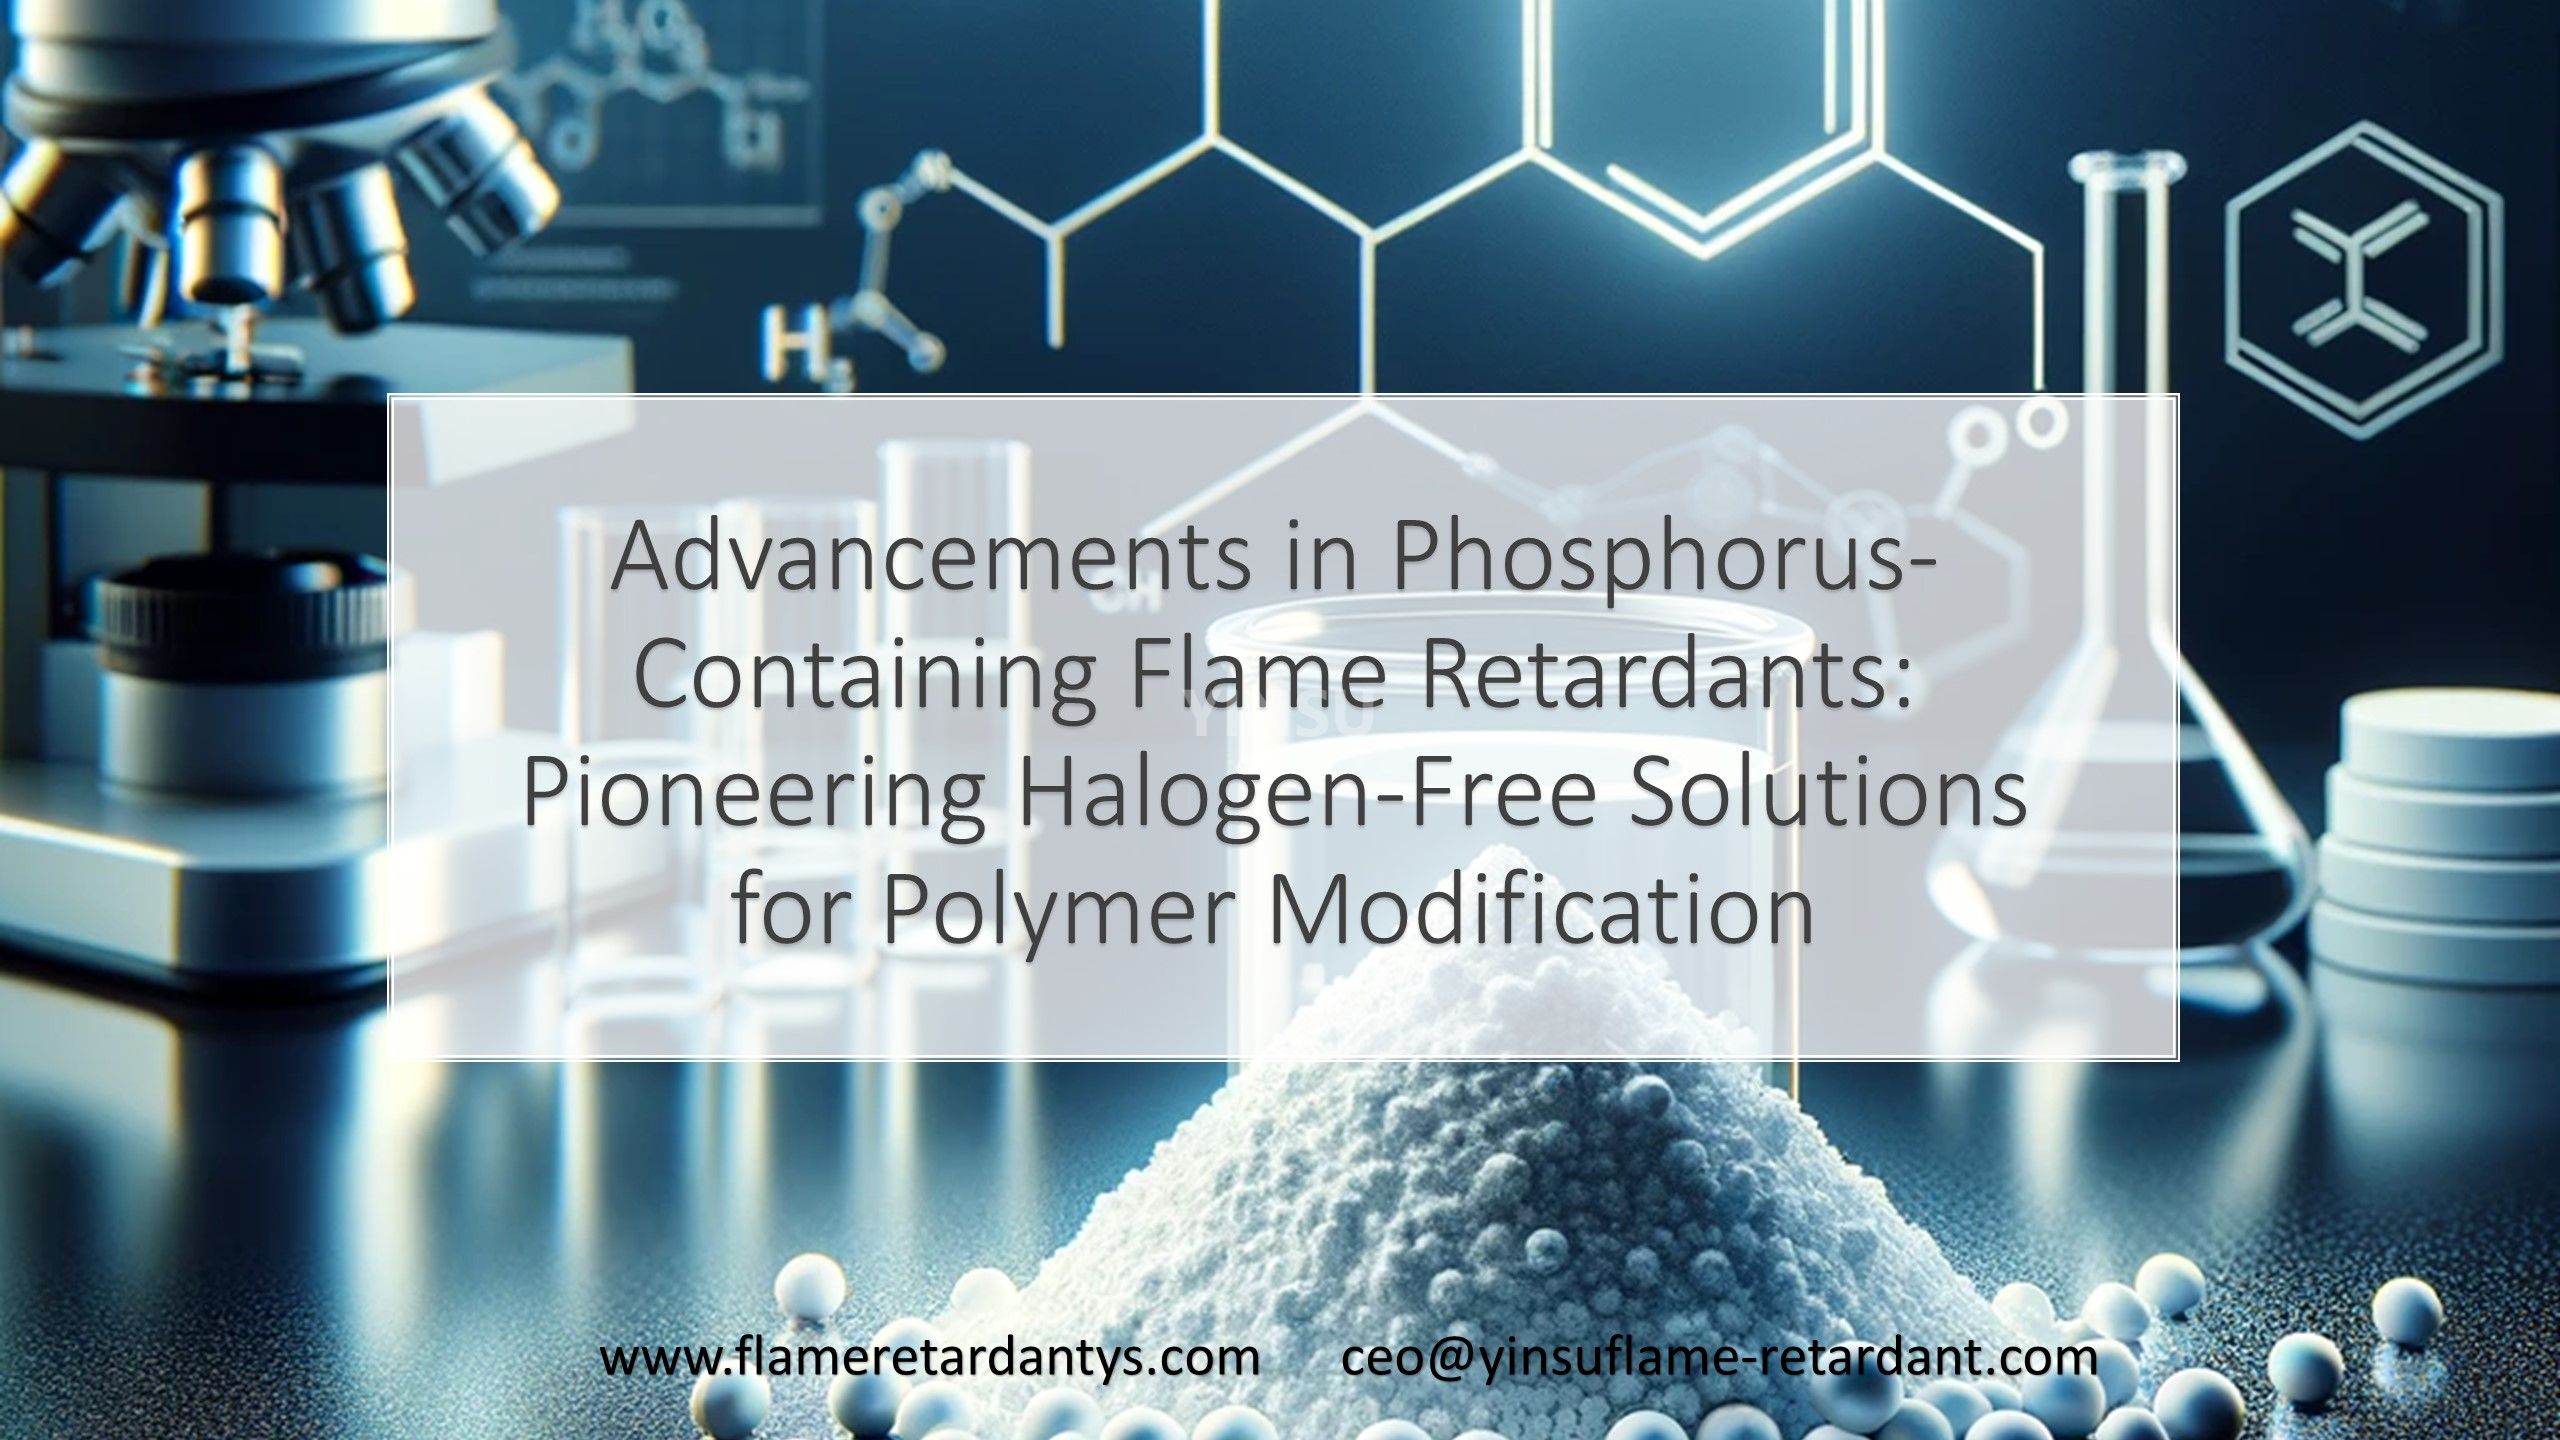 Advancements in Phosphorus-Containing Flame Retardants: Pioneering Halogen-Free Solutions for Polymer Modification